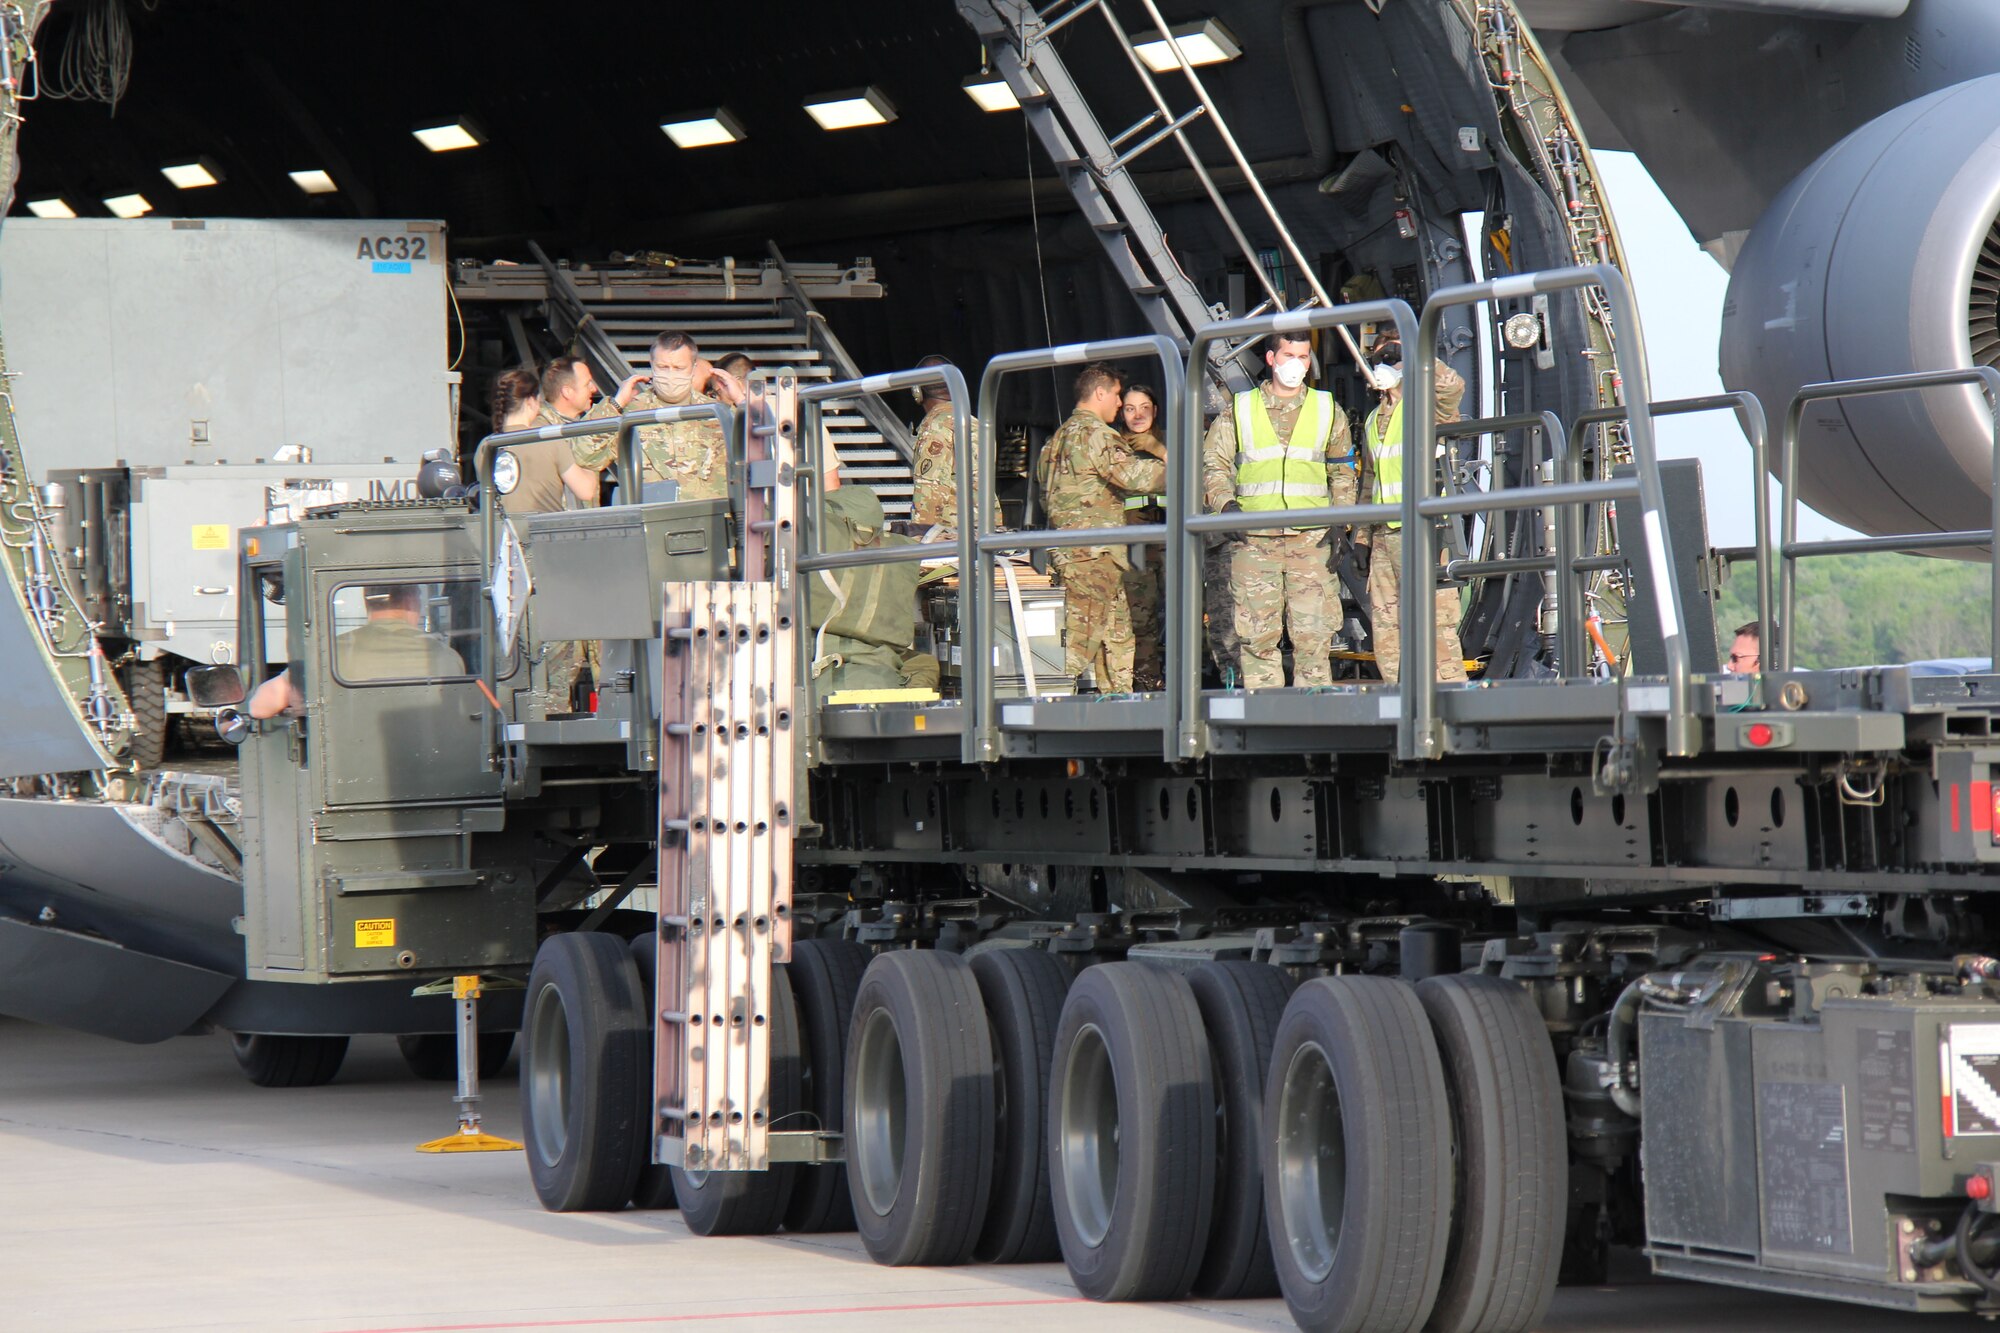 Photo shows uniformed members unloading cargo from the front end of a C-5 Galaxy aircraft.